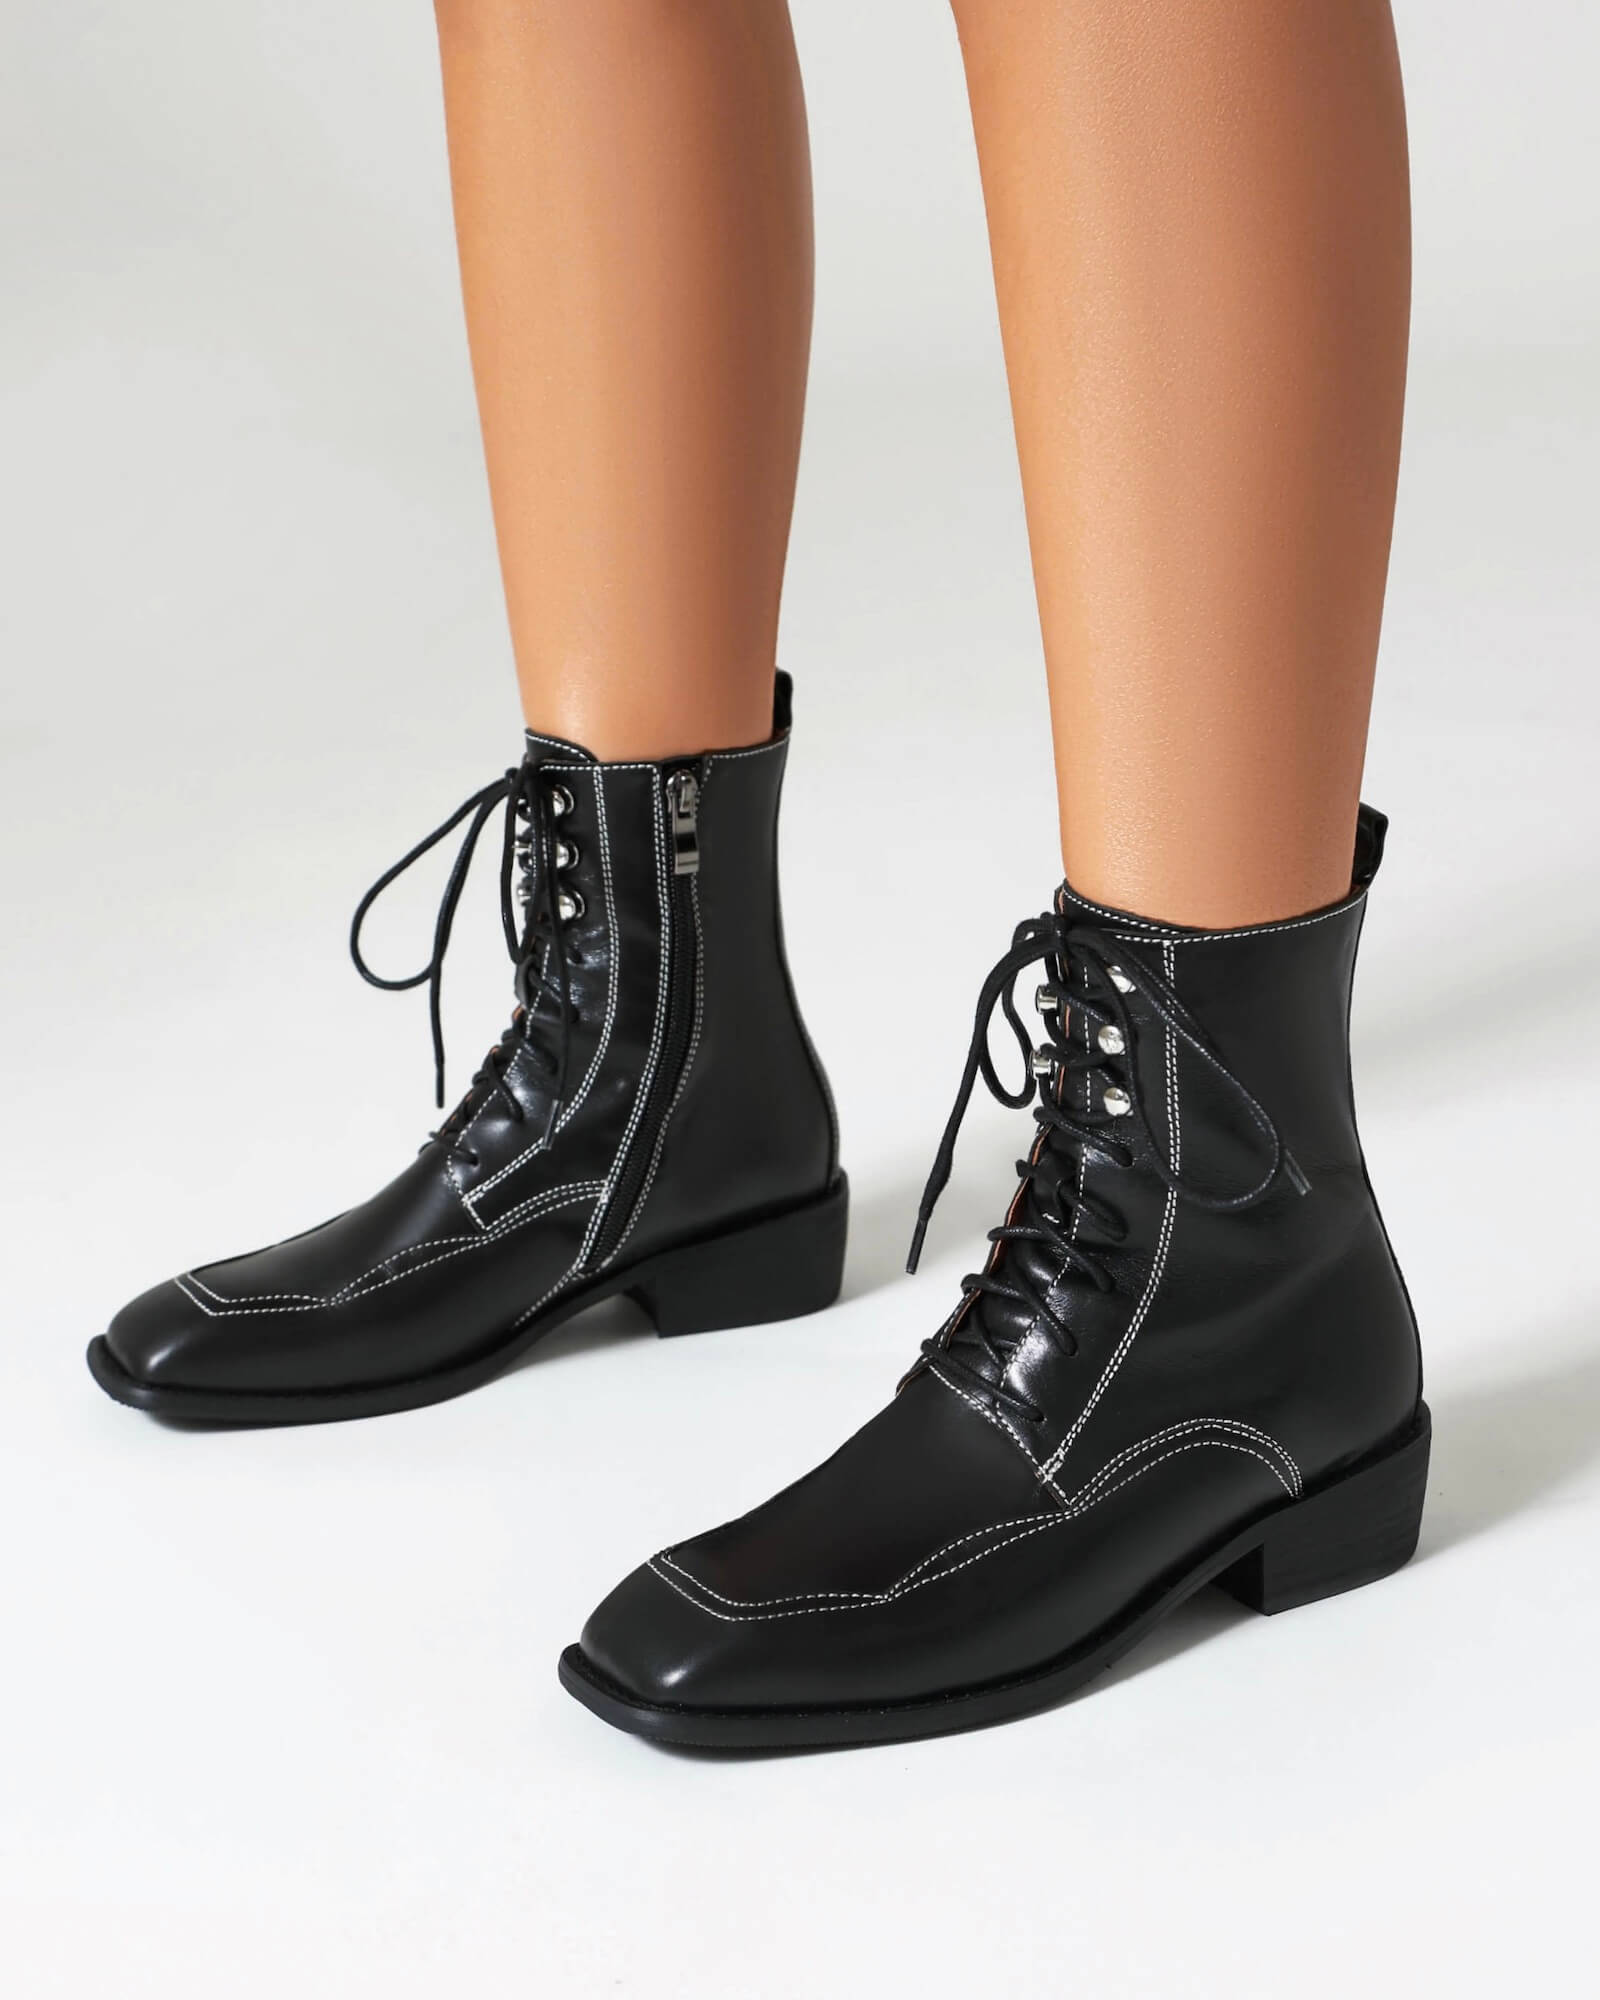 Foria-topstitching-leather-boots-model